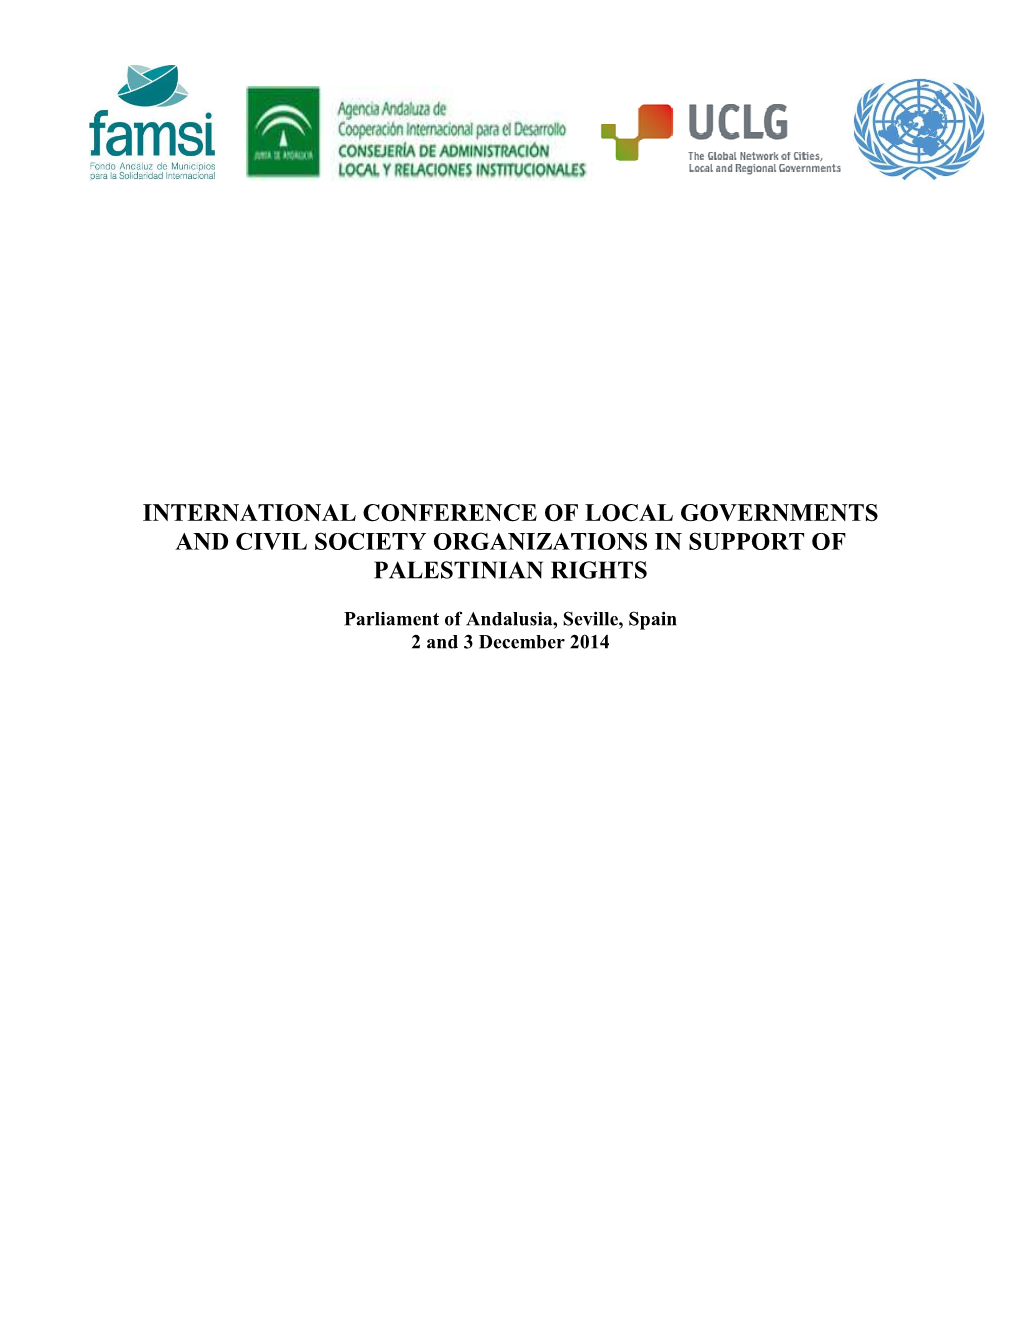 International Conference of Local Governments and Civil Society Organizations in Support of Palestinian Rights